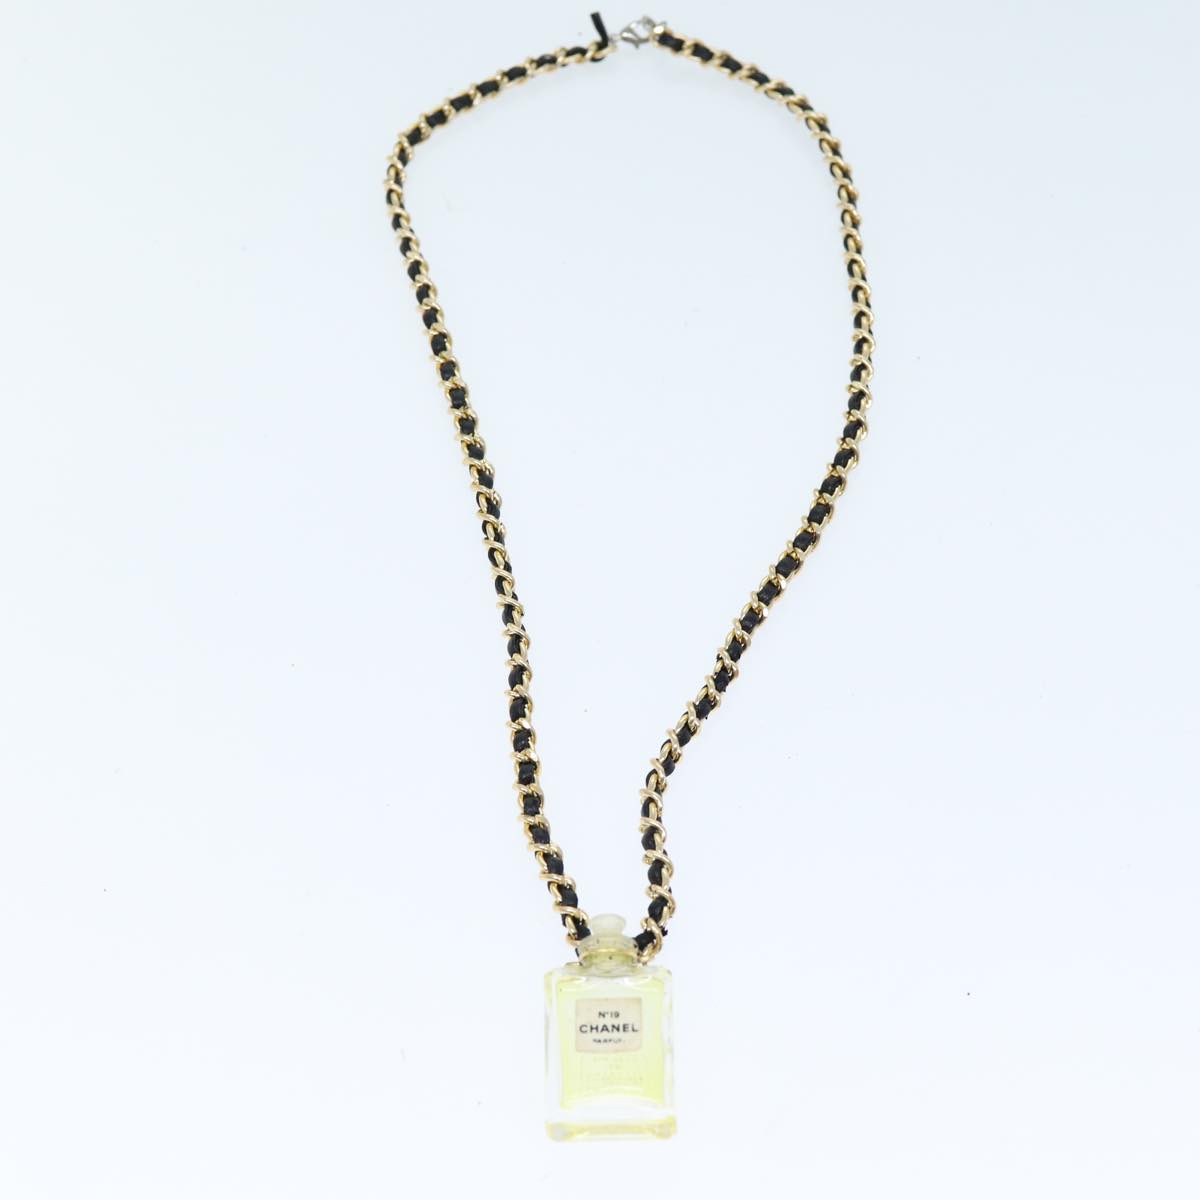 CHANEL Perfume N°19 Necklace Metal Leather Gold Black CC Auth bs13938 - 0